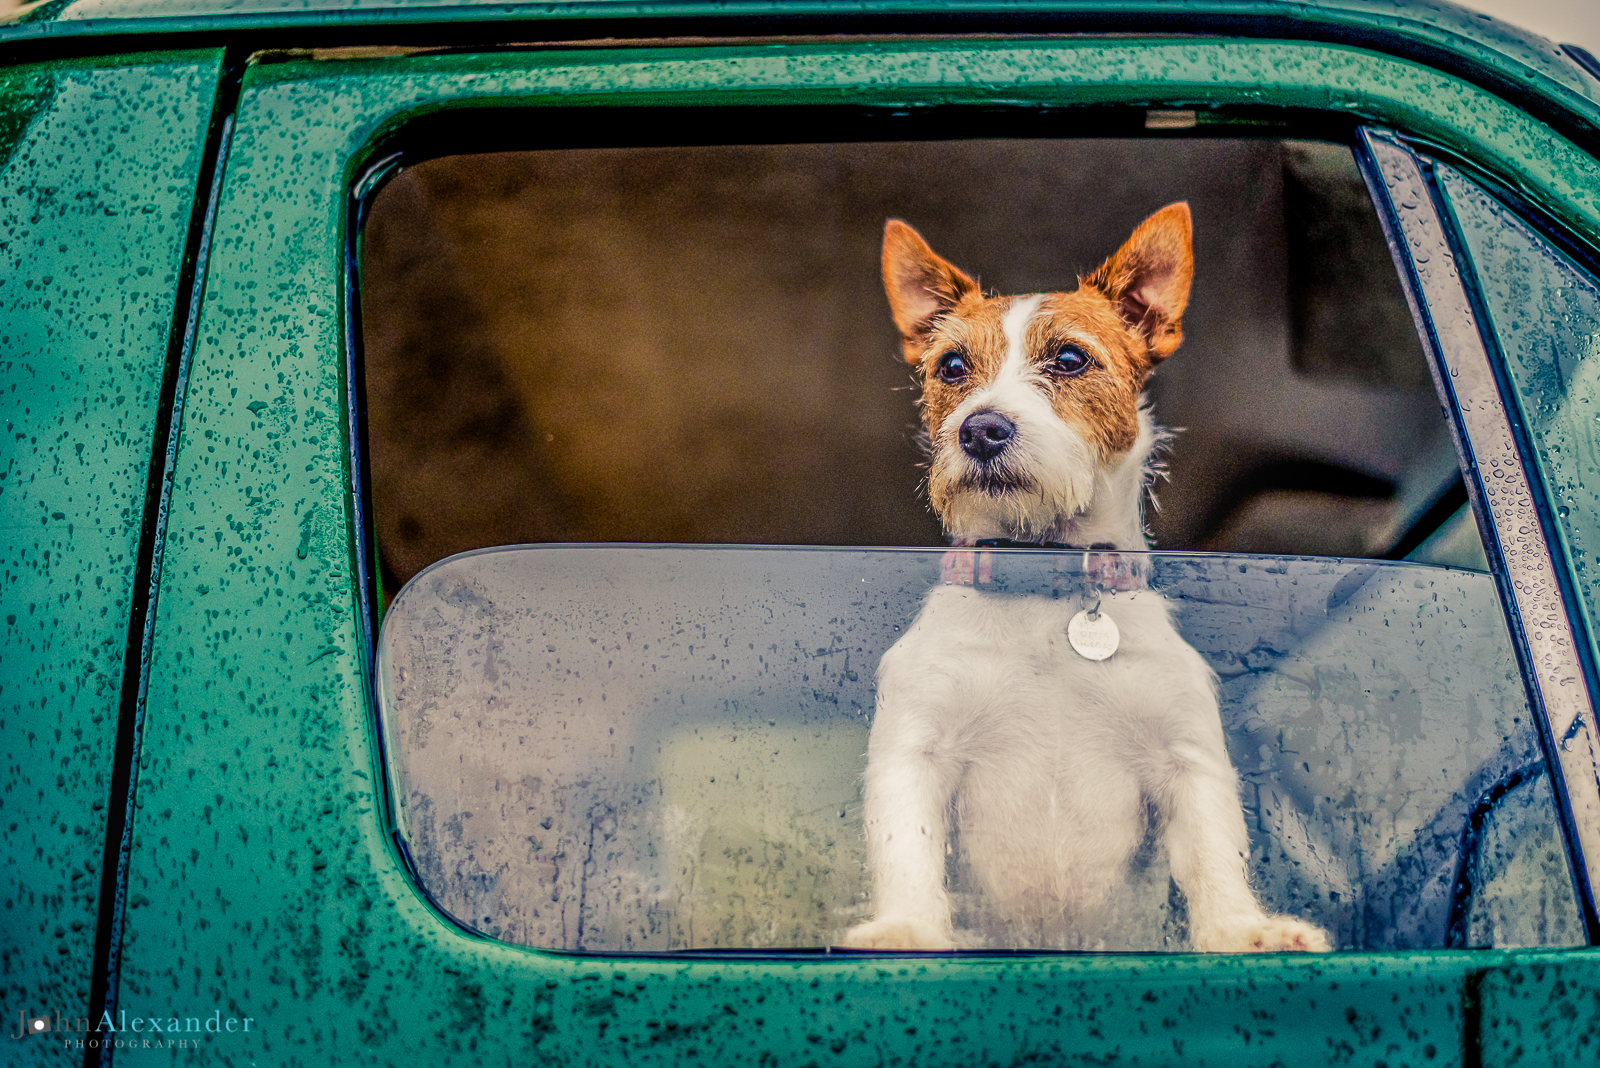 Jack Russell dog poking his head out of the front window of a green Land Rover